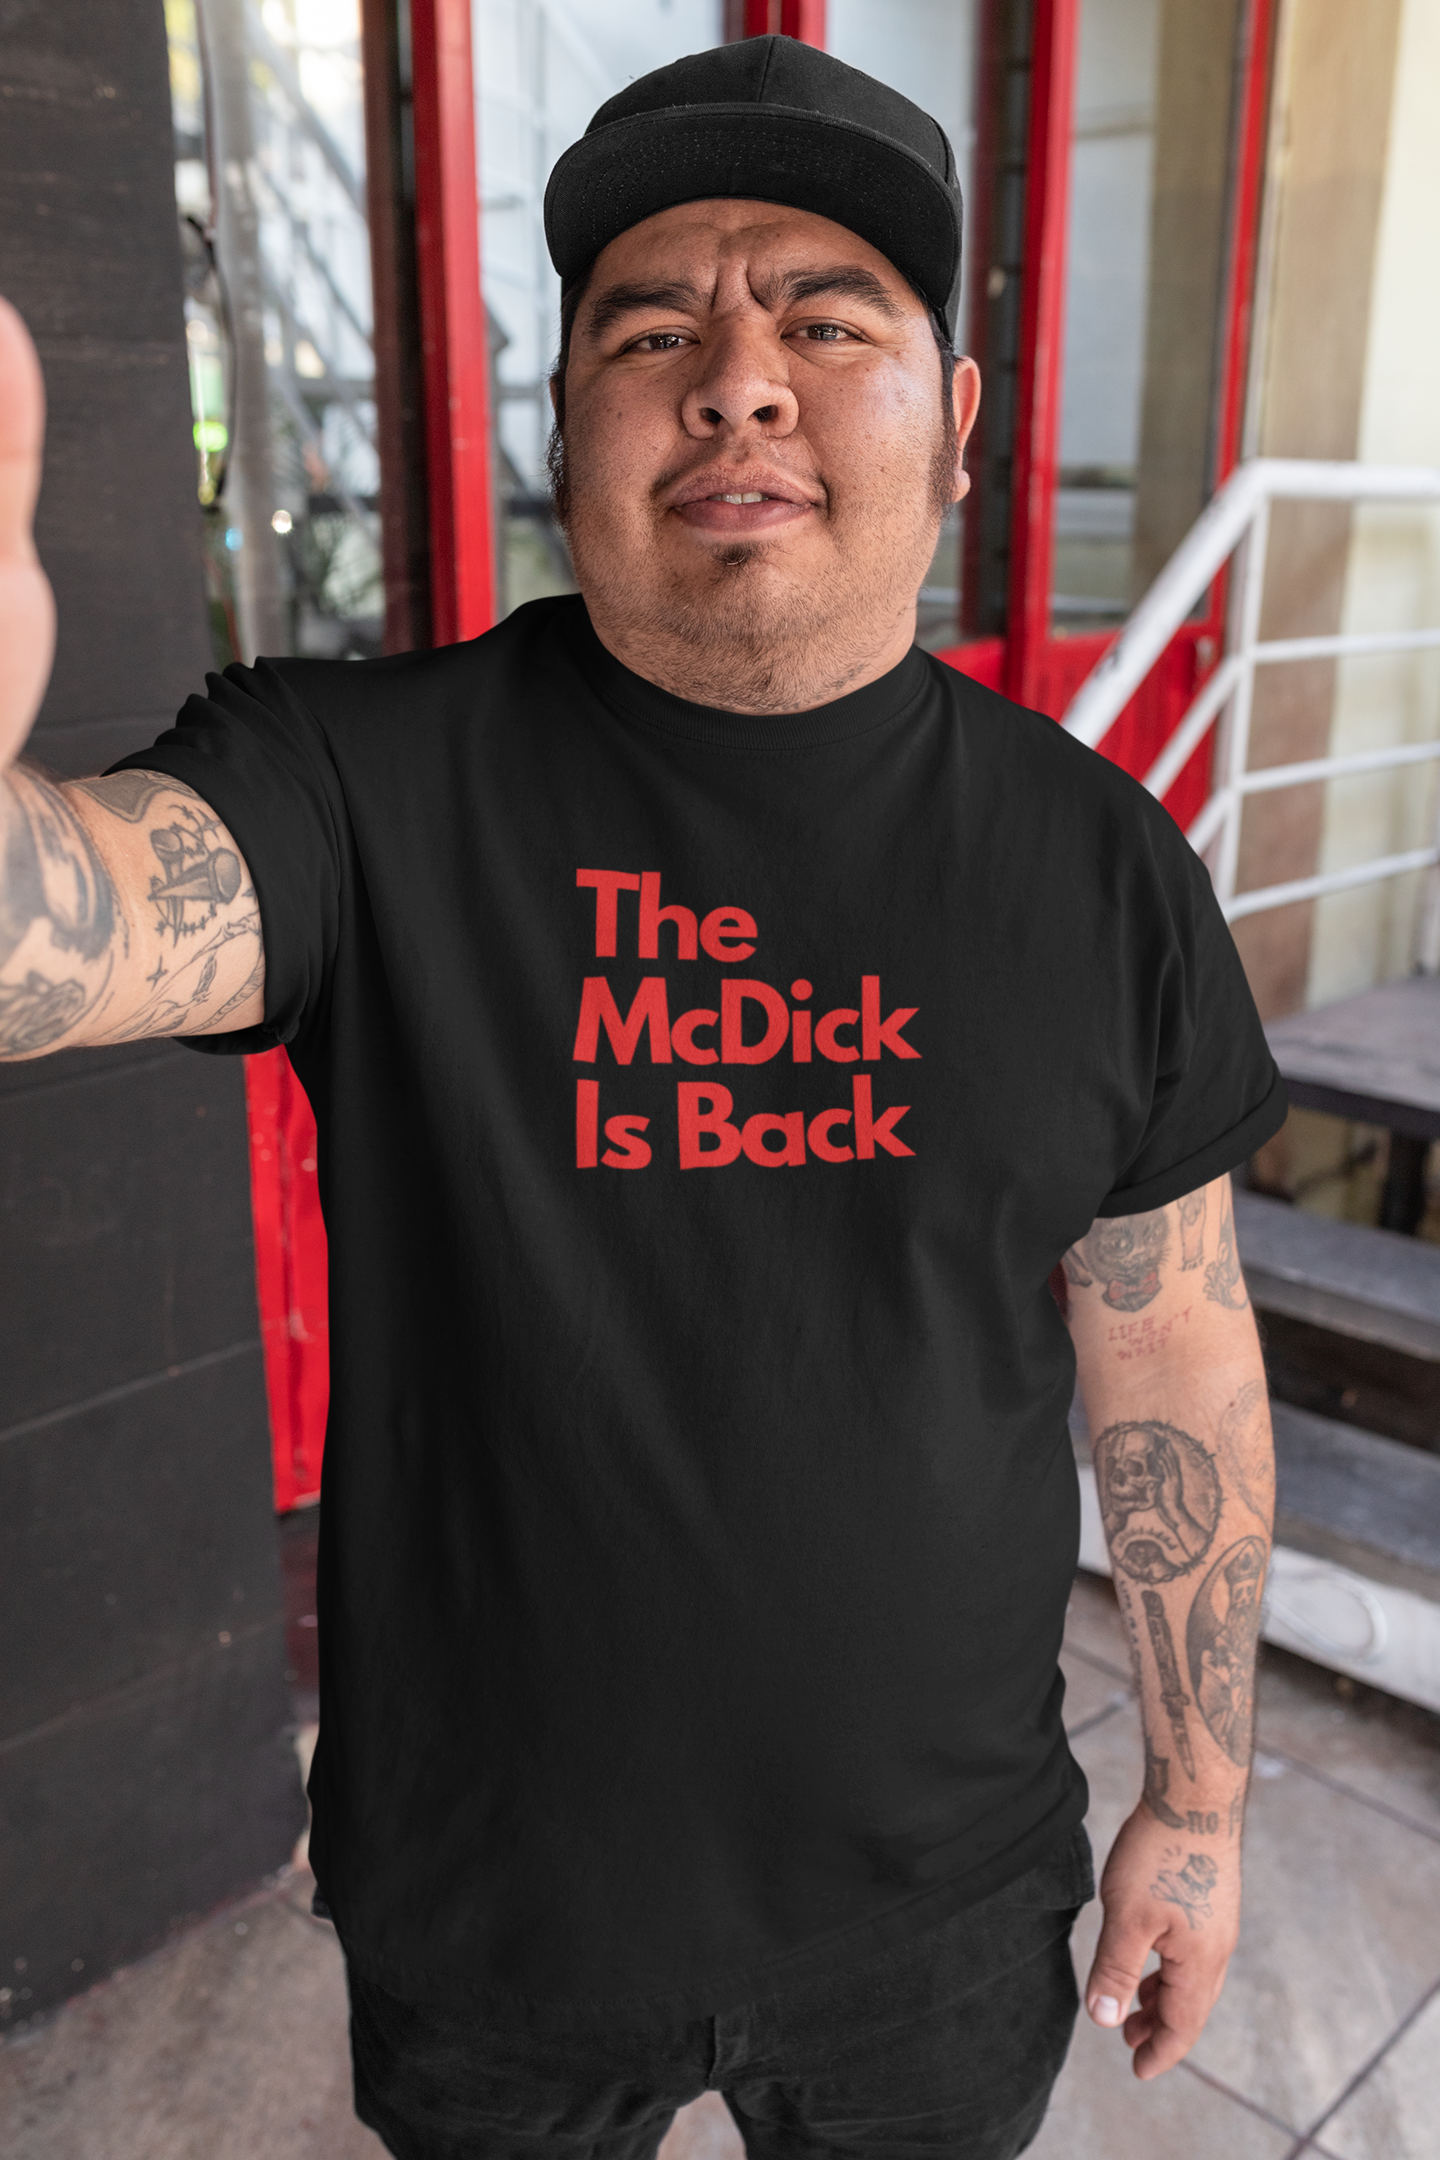 1 The McDick is Back! Obnoxious Apparel - Funny Offensive Shirts for Men